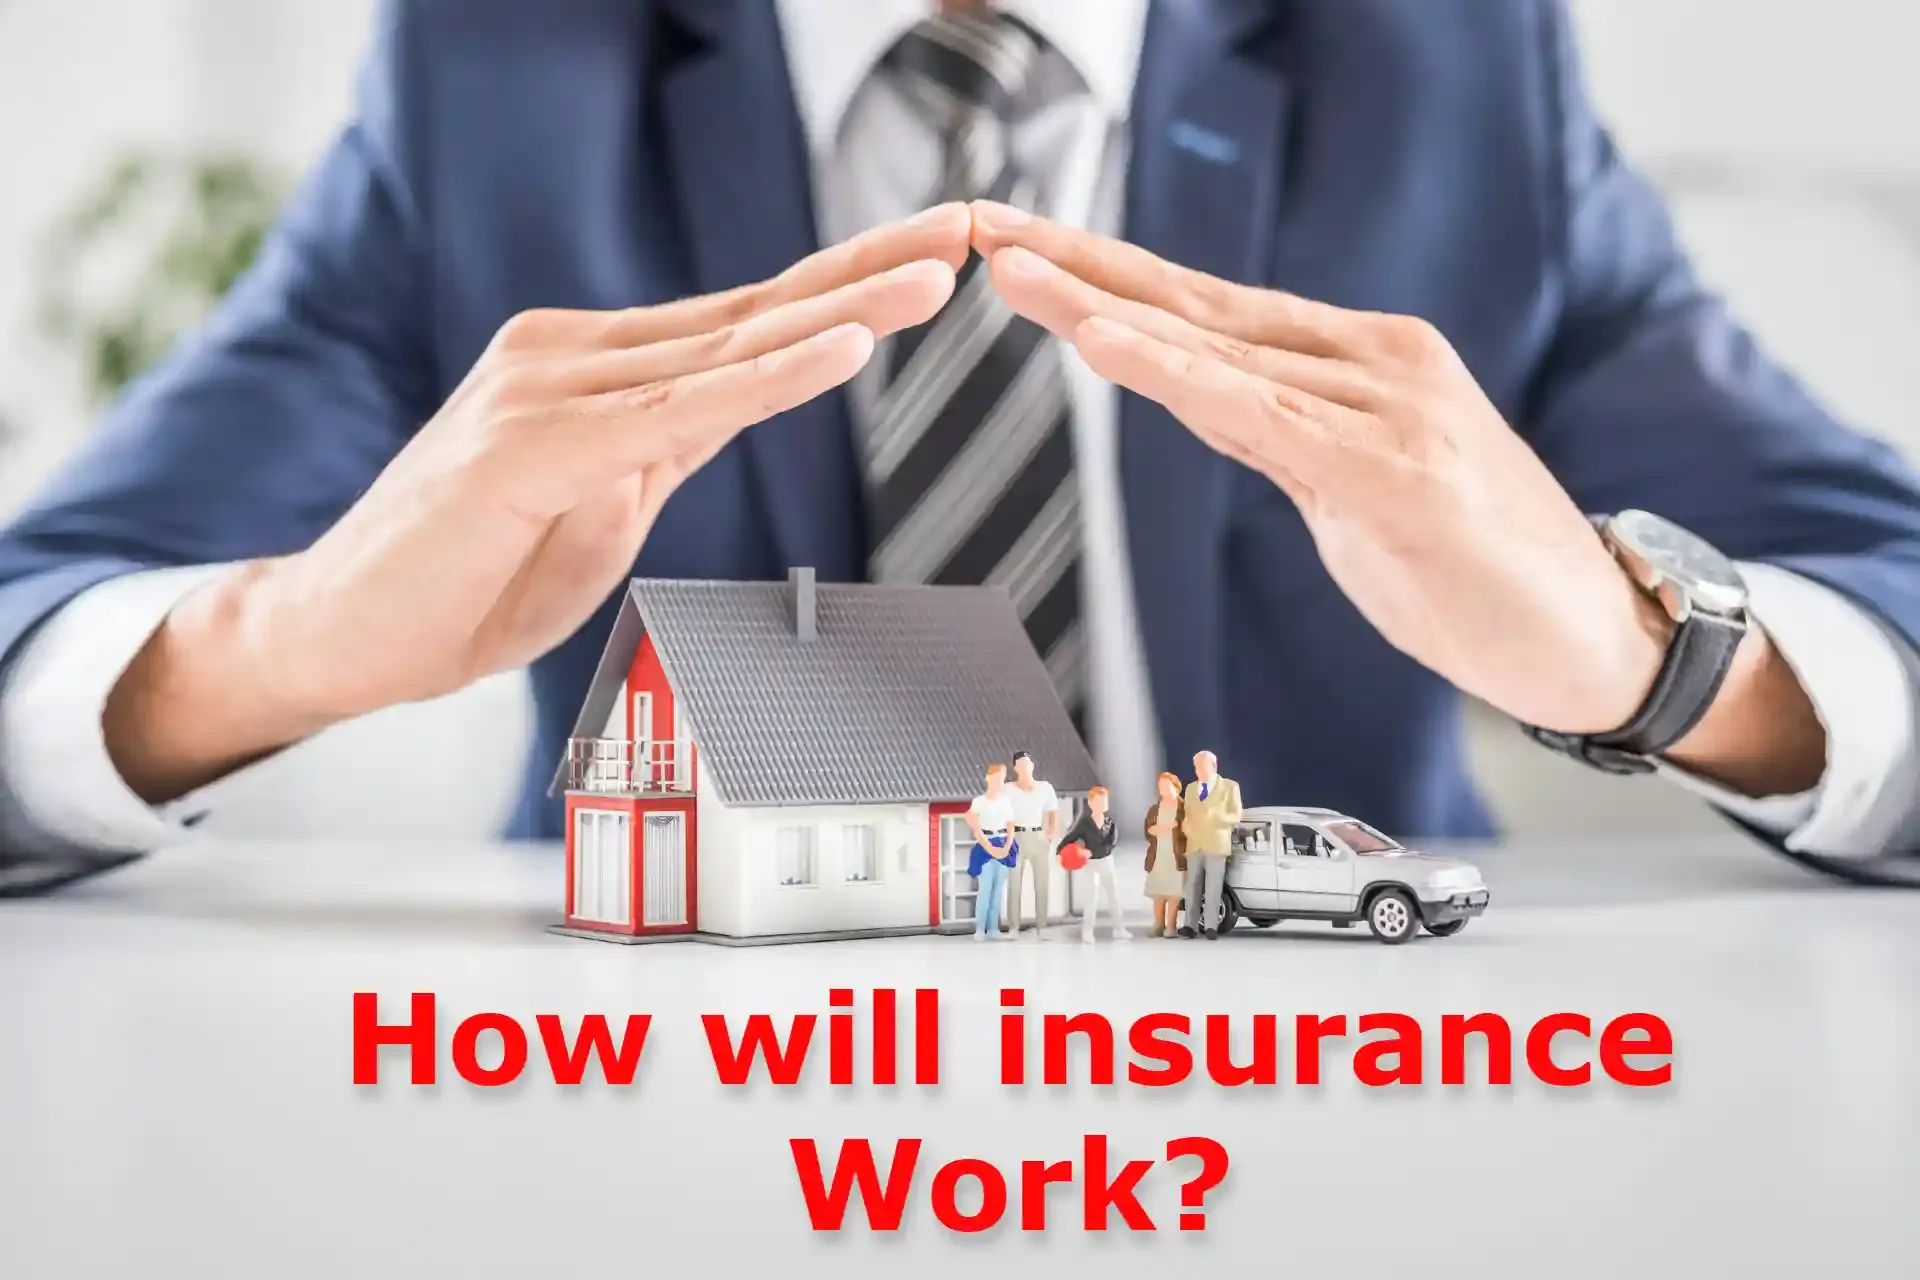 How will insurance Work?